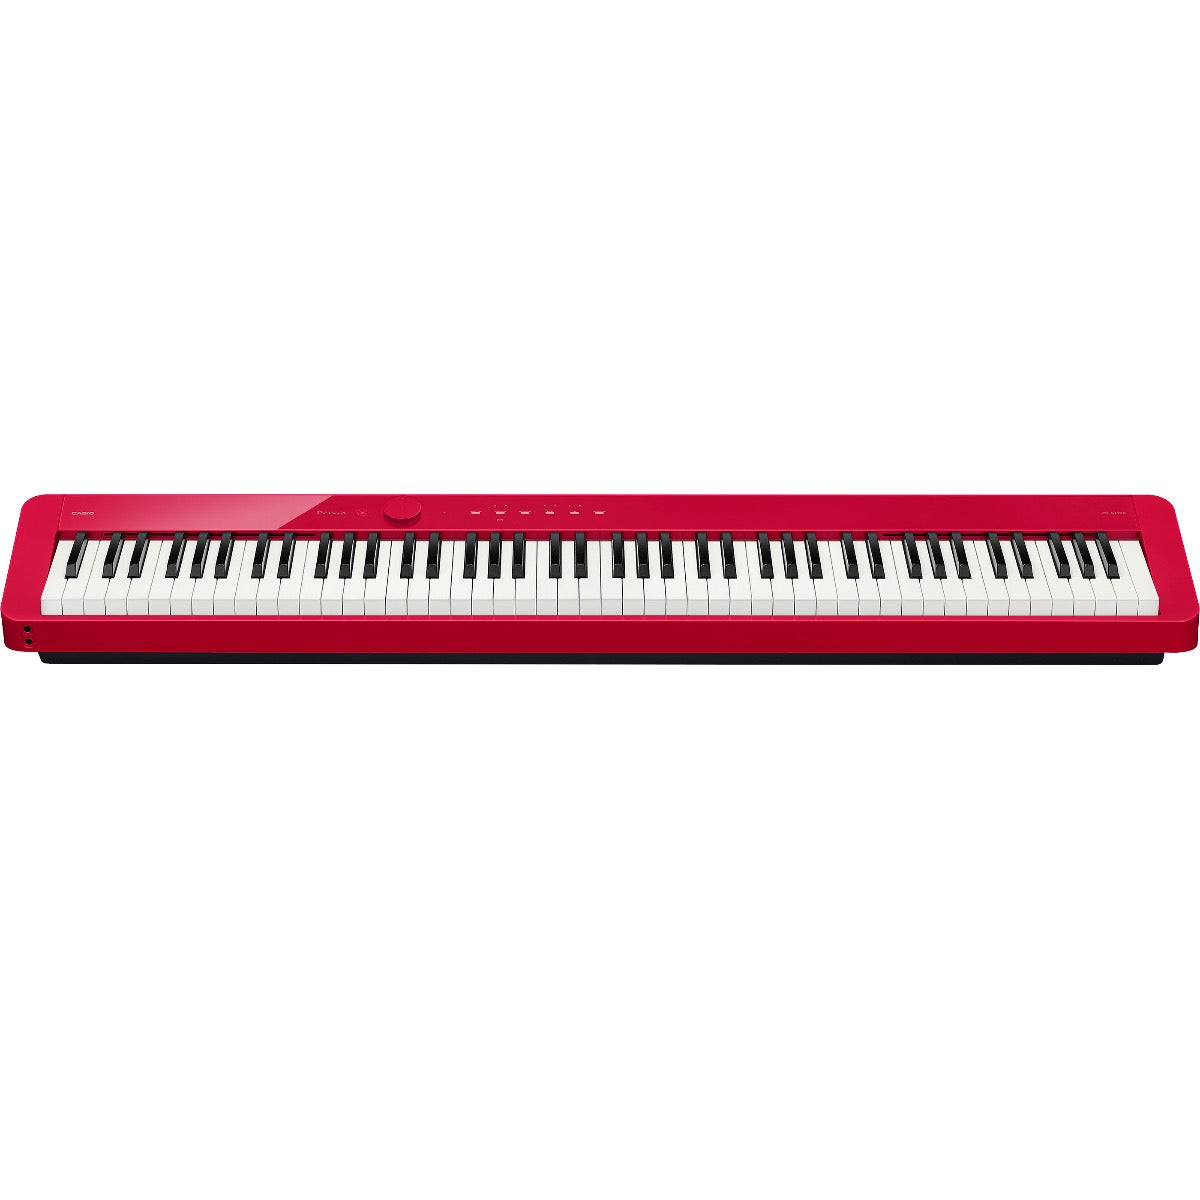 Perspective view of Casio Privia PX-S1100 Digital Piano - Red showing top and front